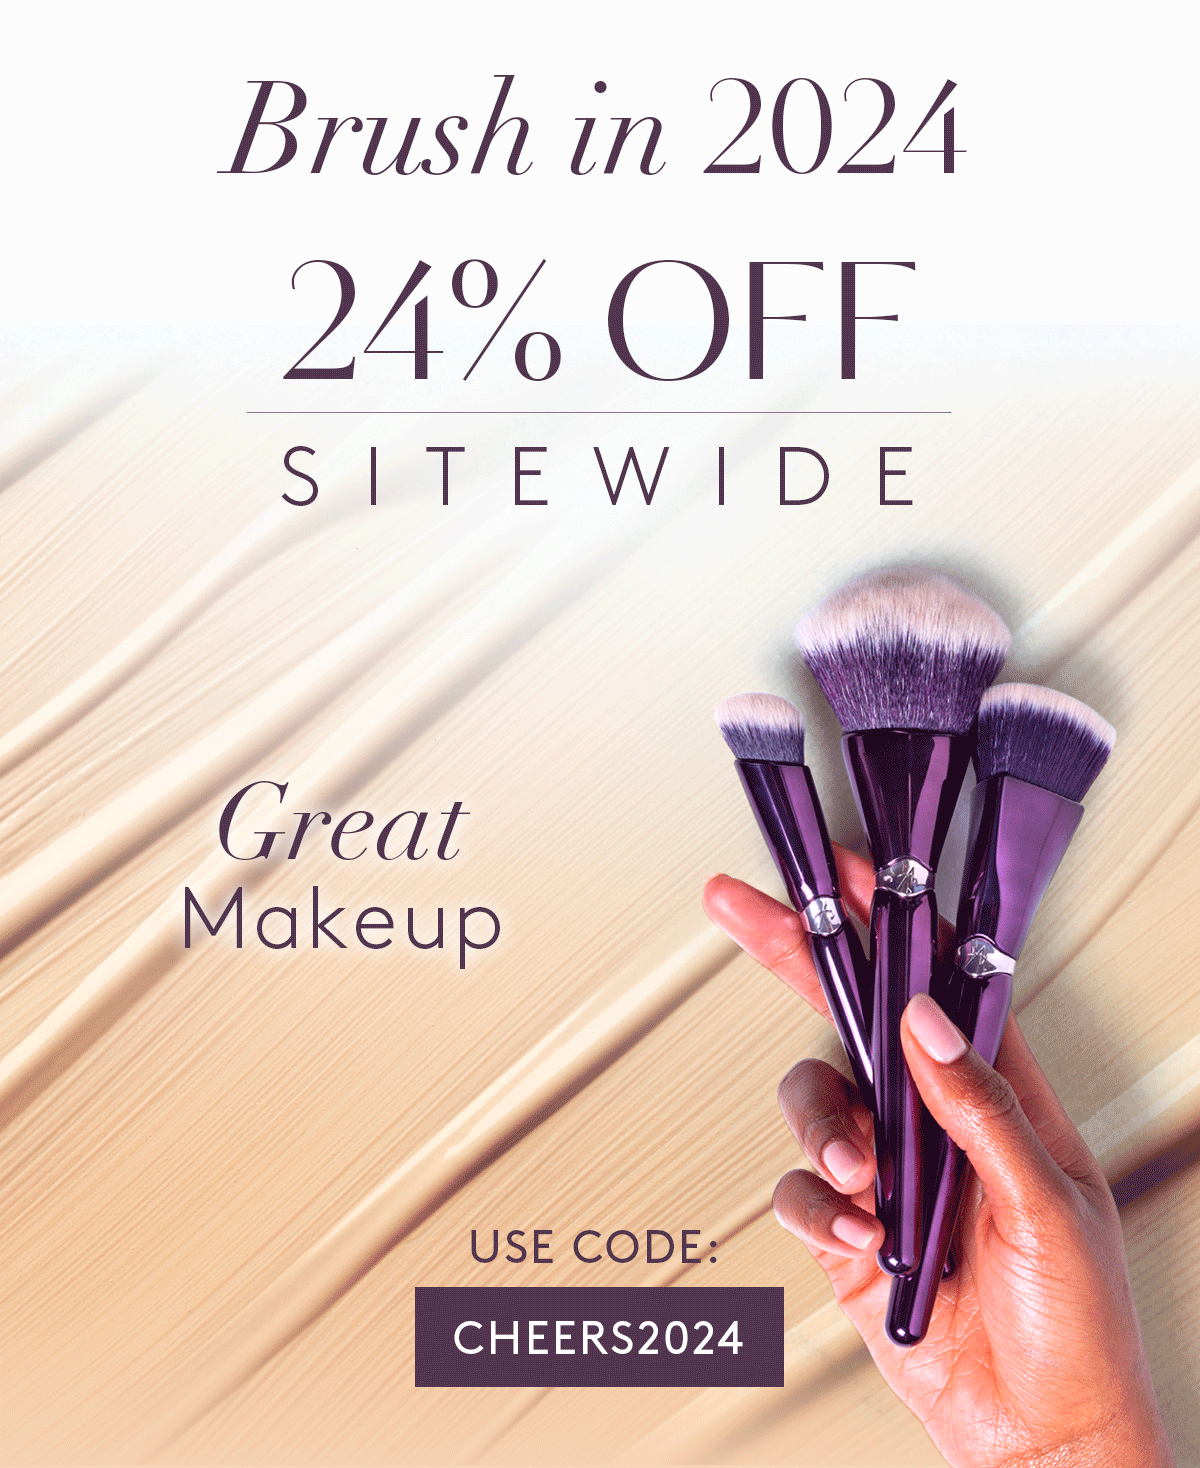 Brush in 2024. 24% Off Sitewide. Great Makeup Starts with Great Skin. Use Code: CHEERS2024